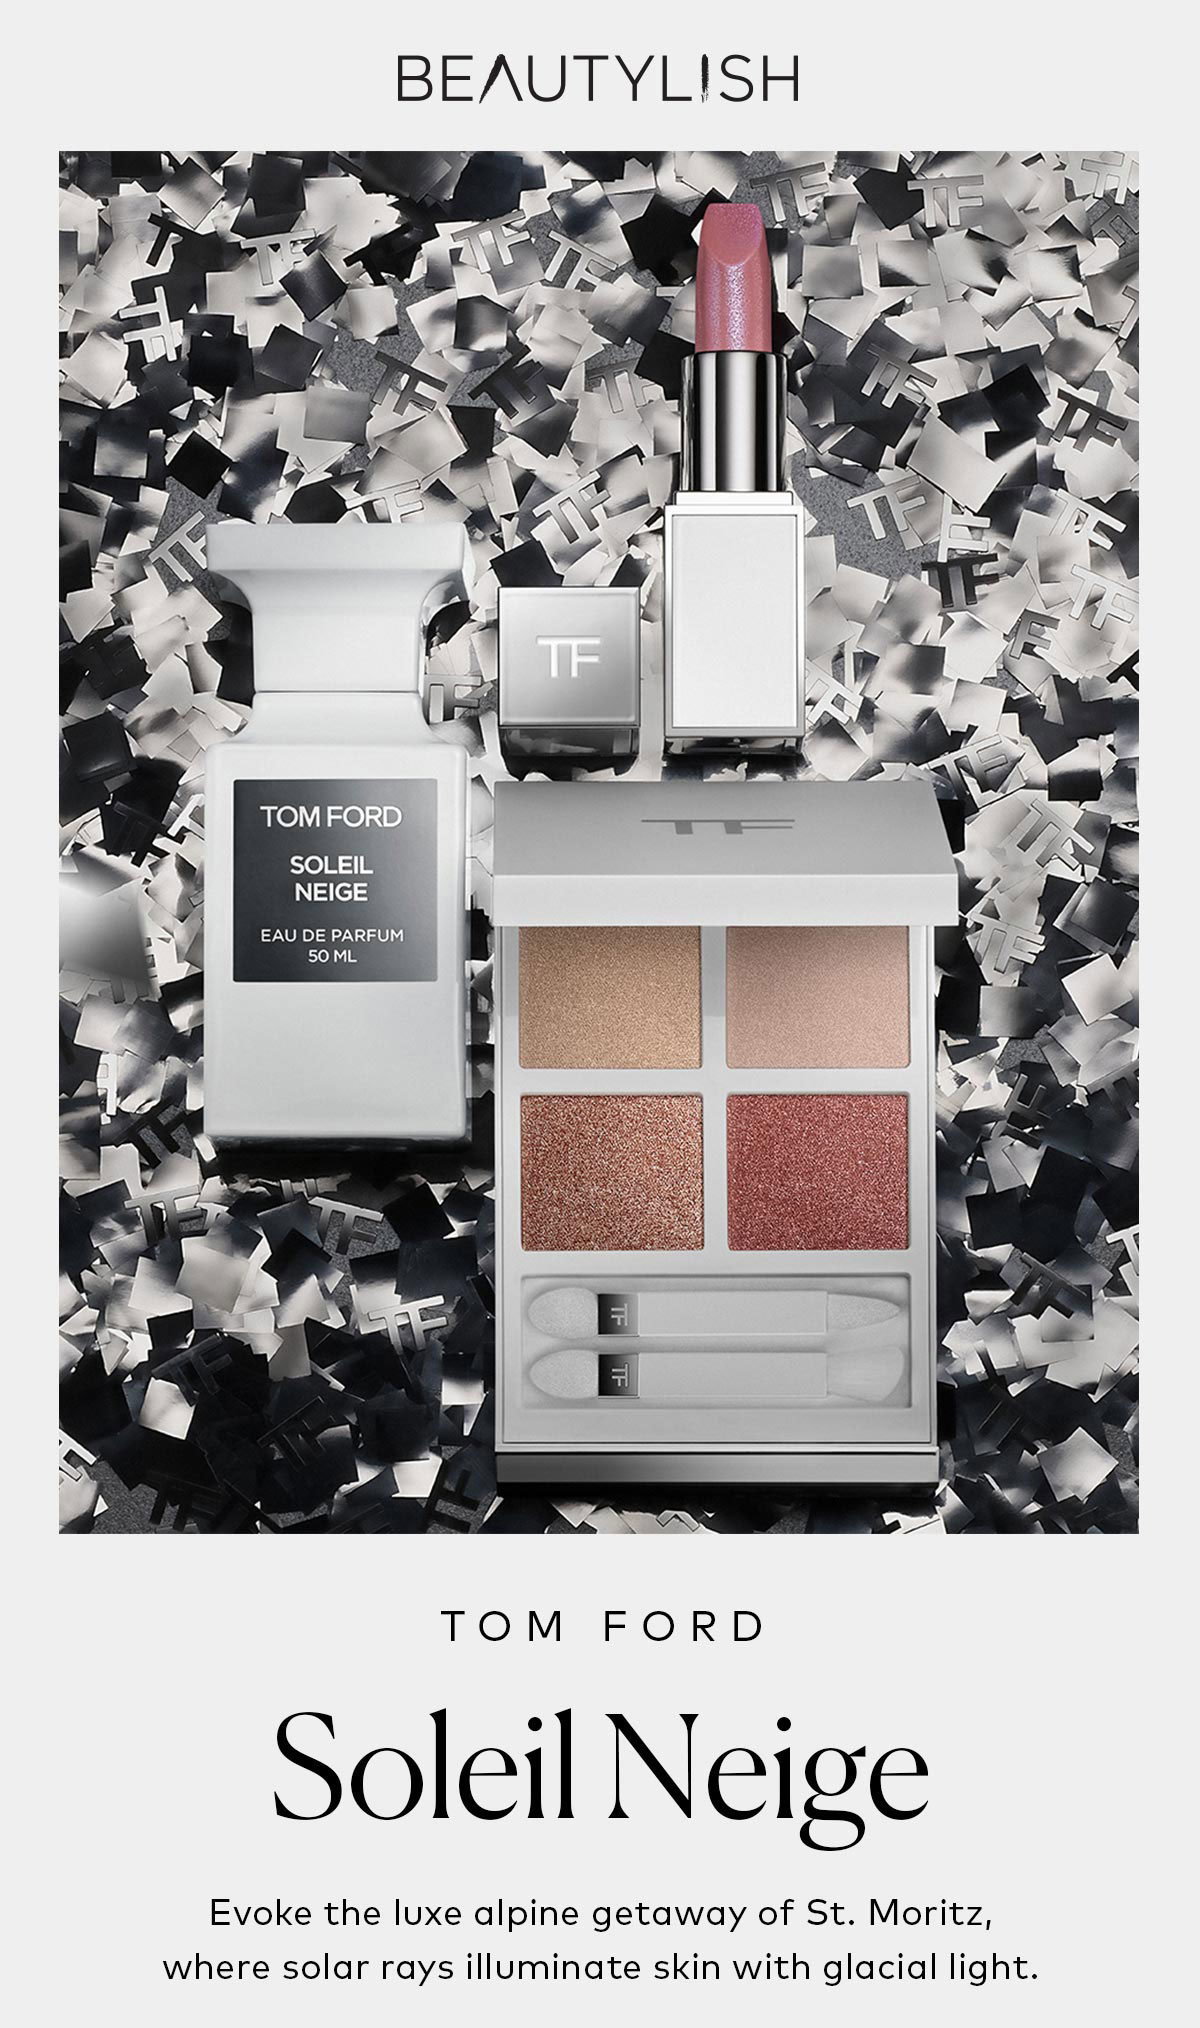 Beautylish: Escape to an alpine haven with new TOM FORD | Milled